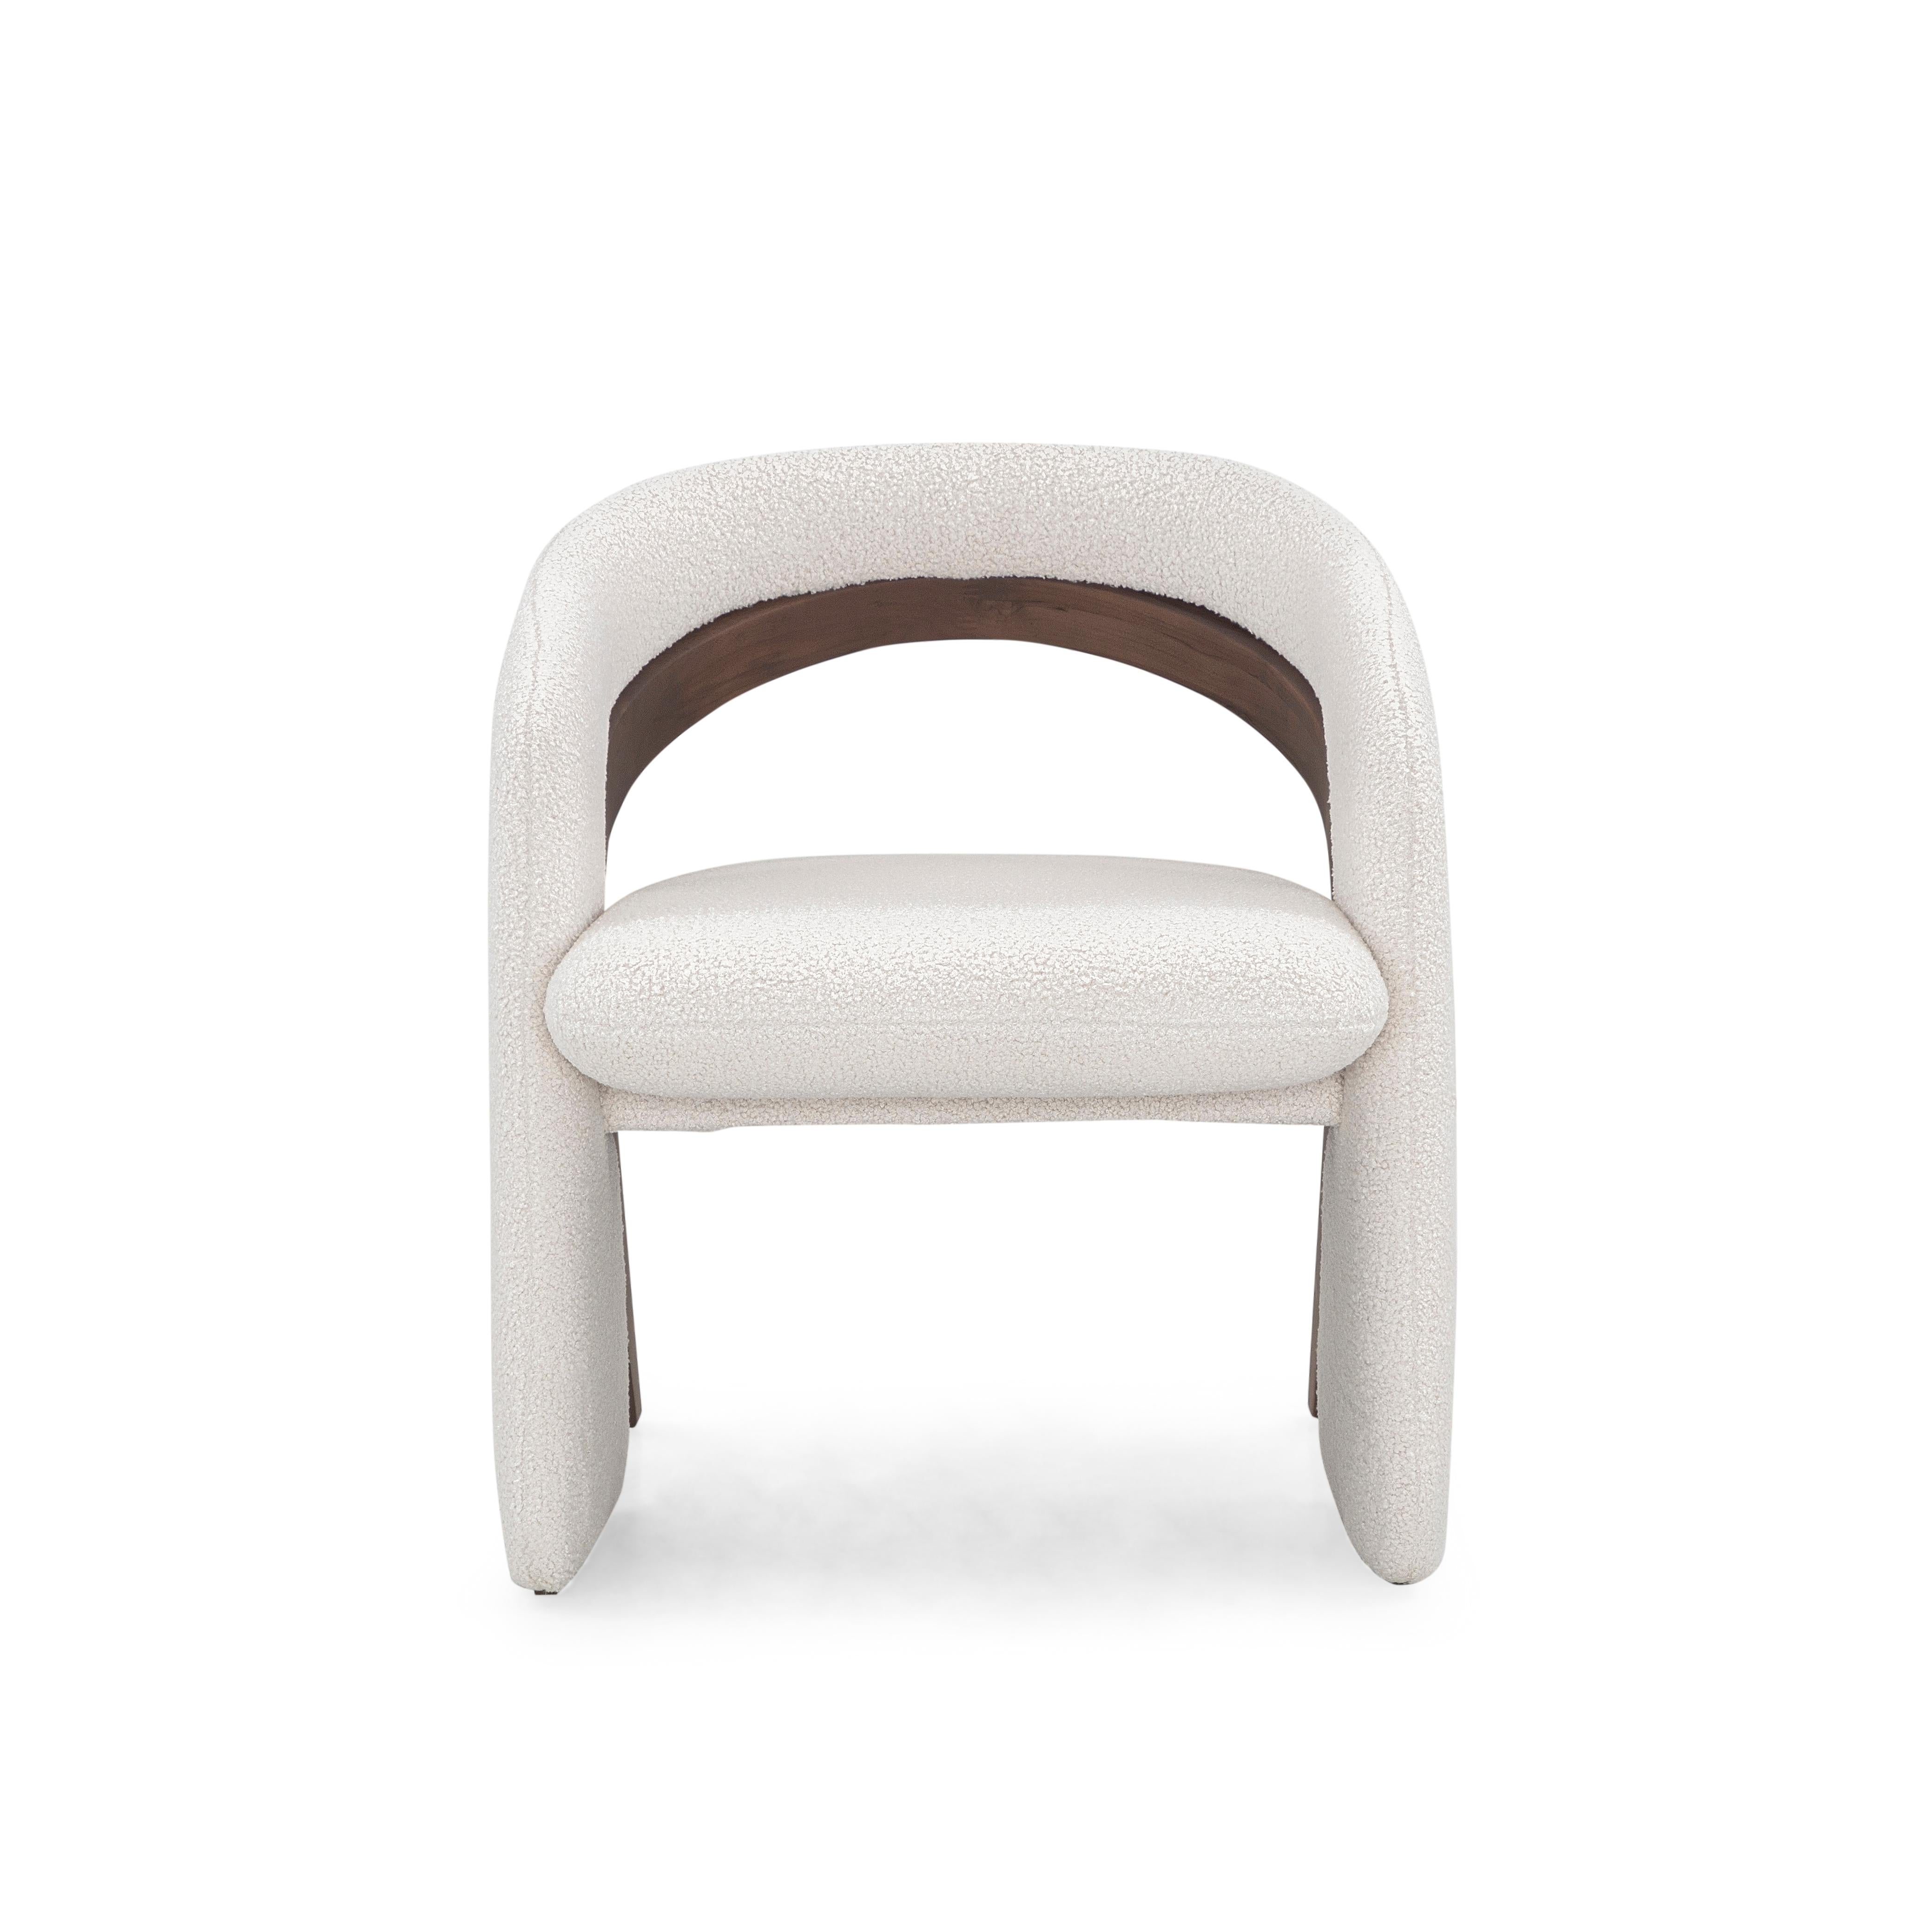 Olga offers unique modern features and an irreverent design that is a perfect fit for any bold and innovative project. Its solid wood frame and upholstery come together in a perfect union that creates a clean and contemporary atmosphere in any space.